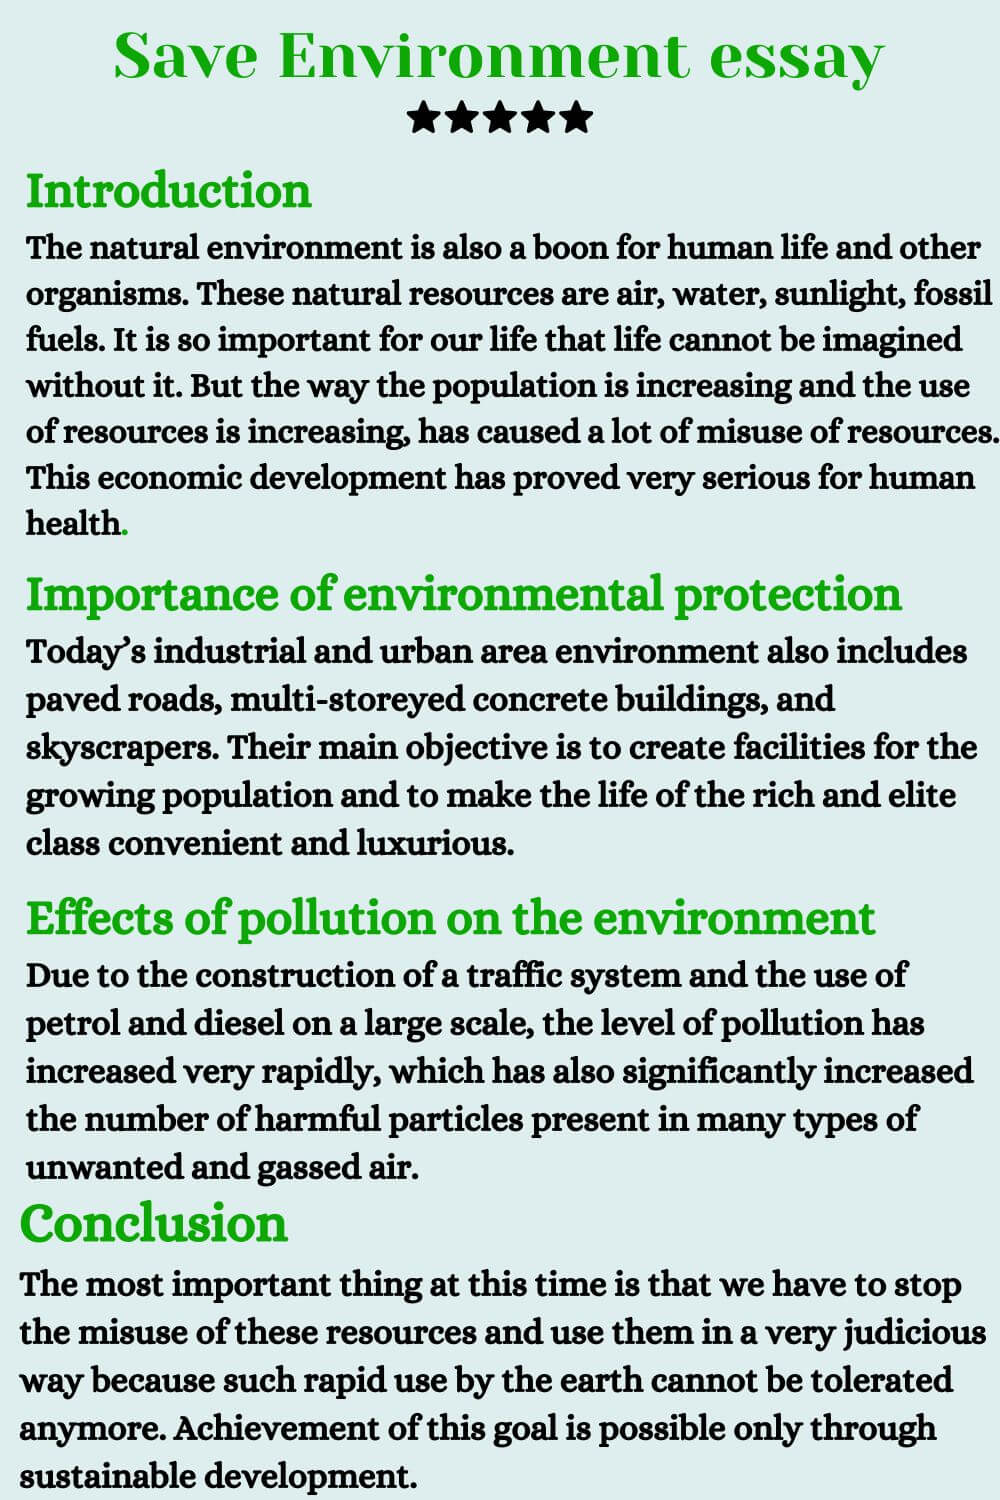 Save Environment for Future Generations Essay